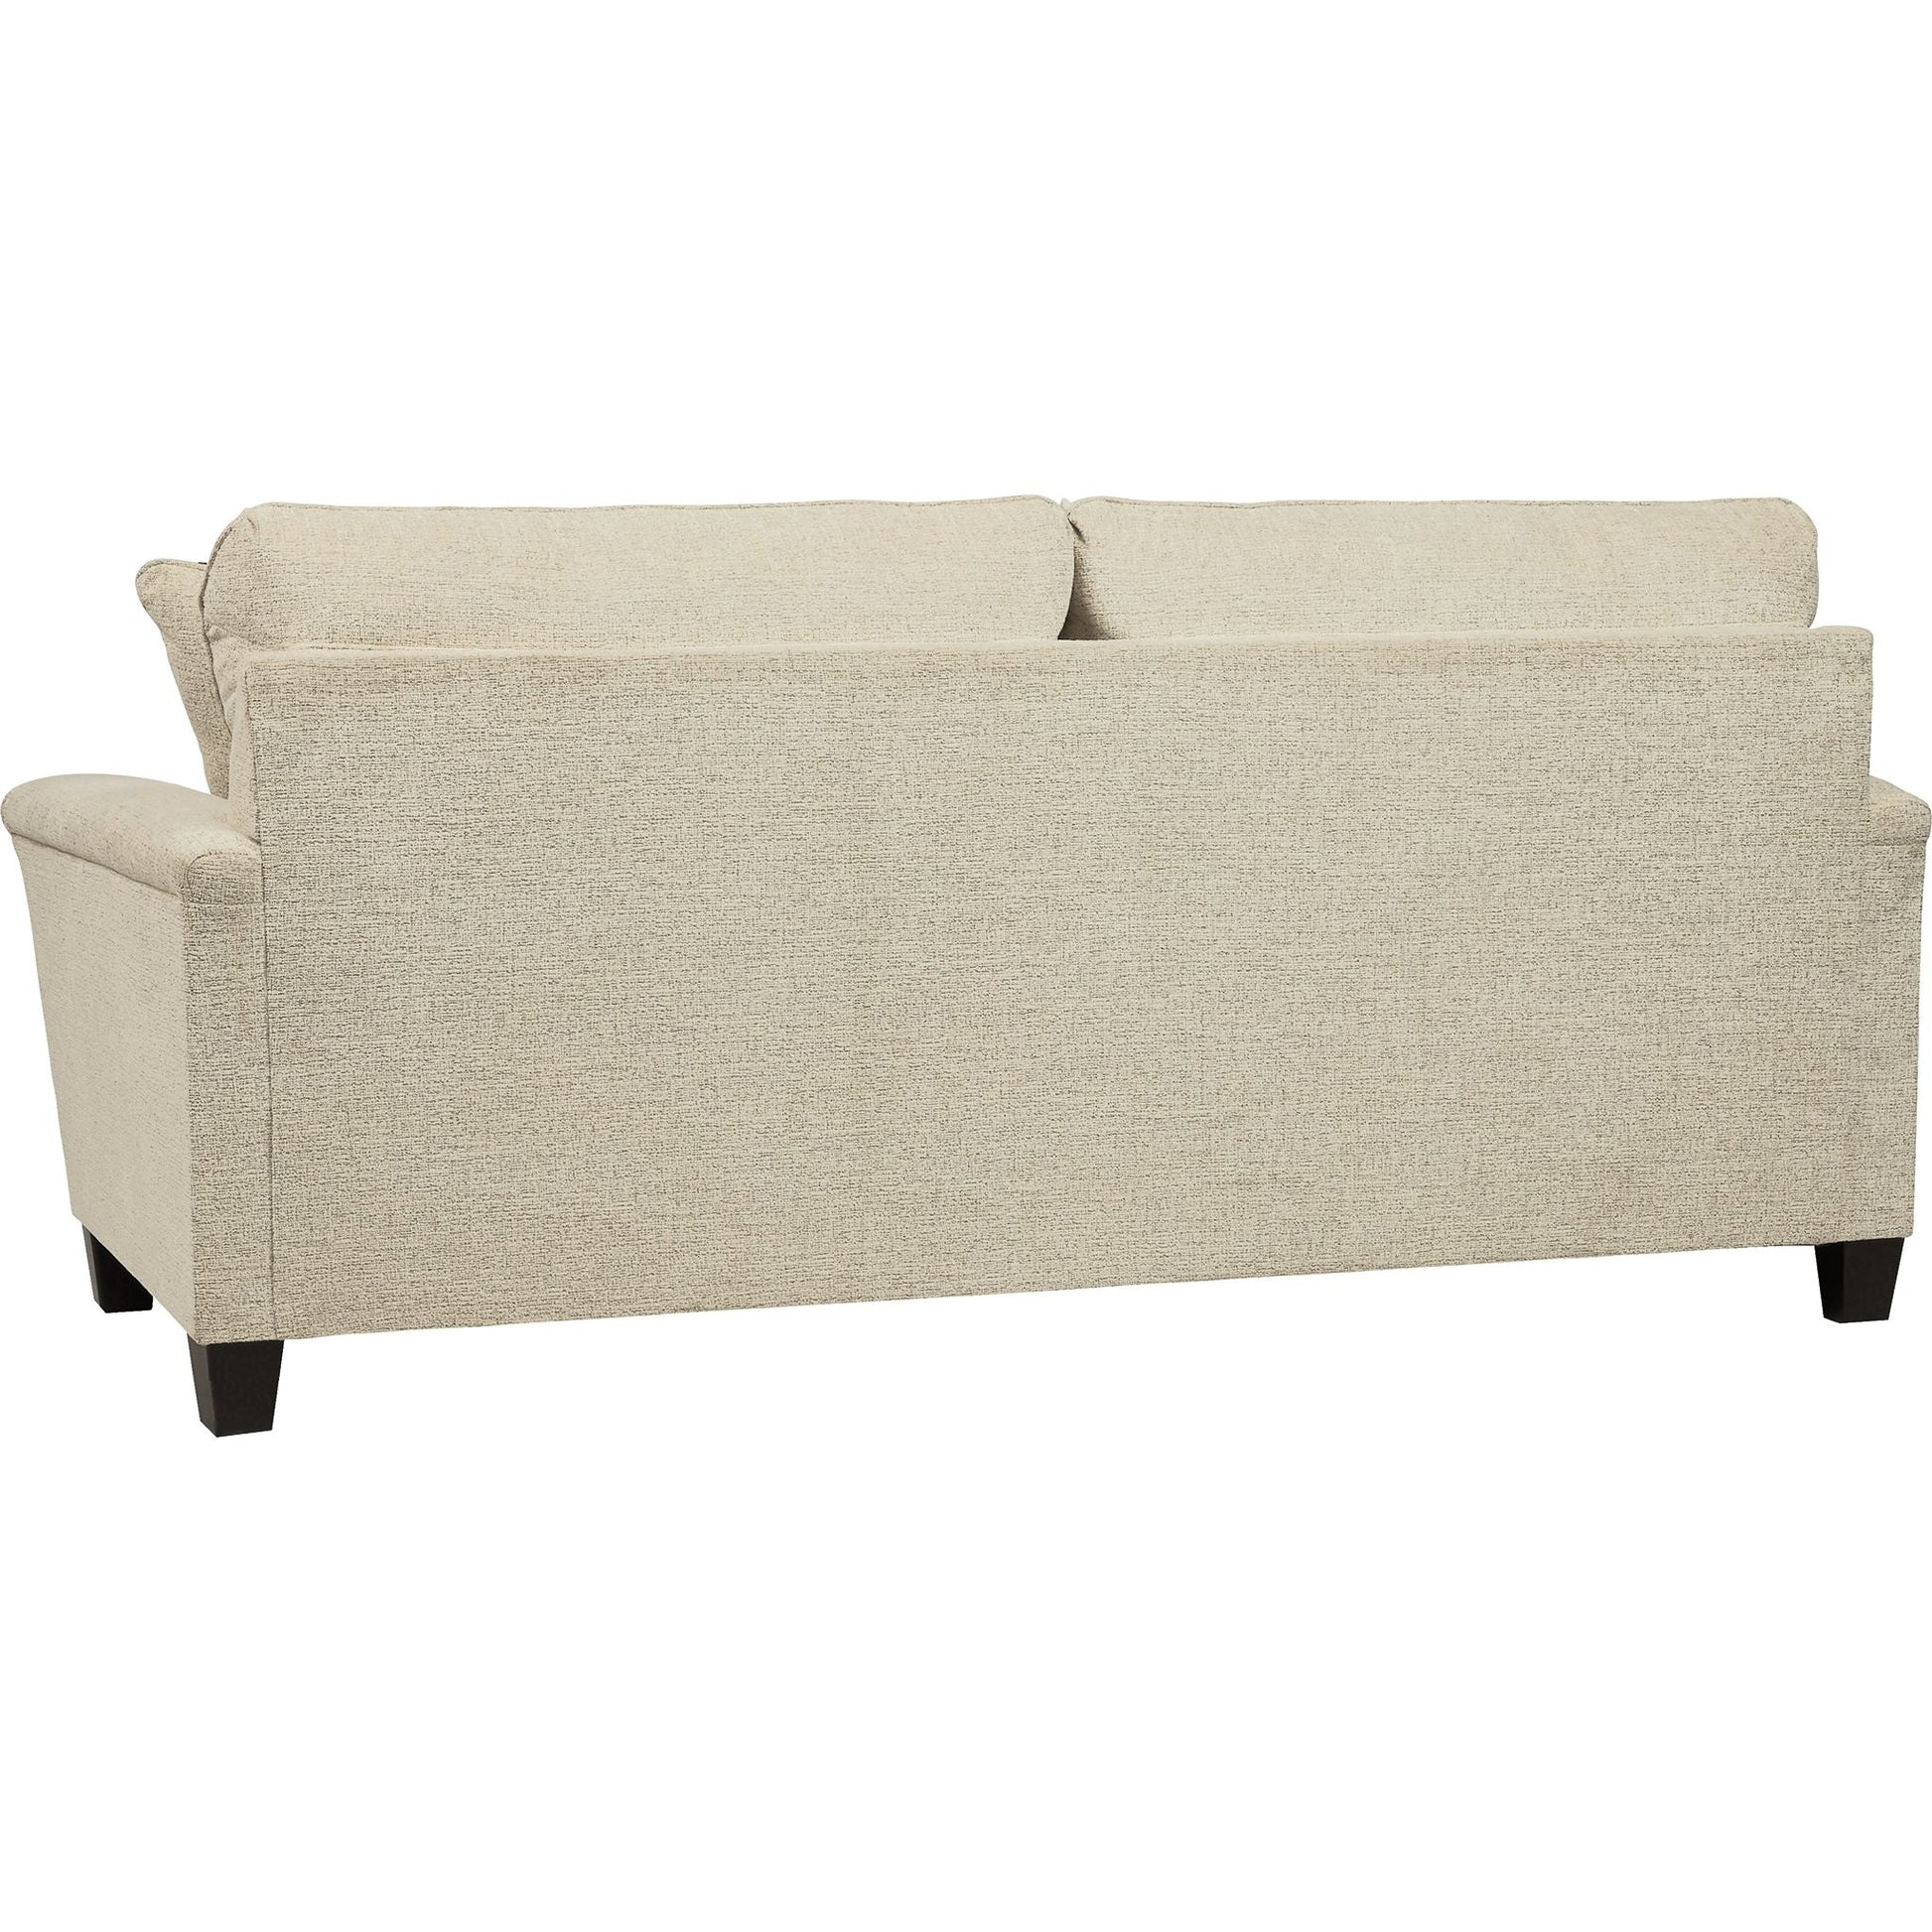 Abinger Queen Sofabed - Natural